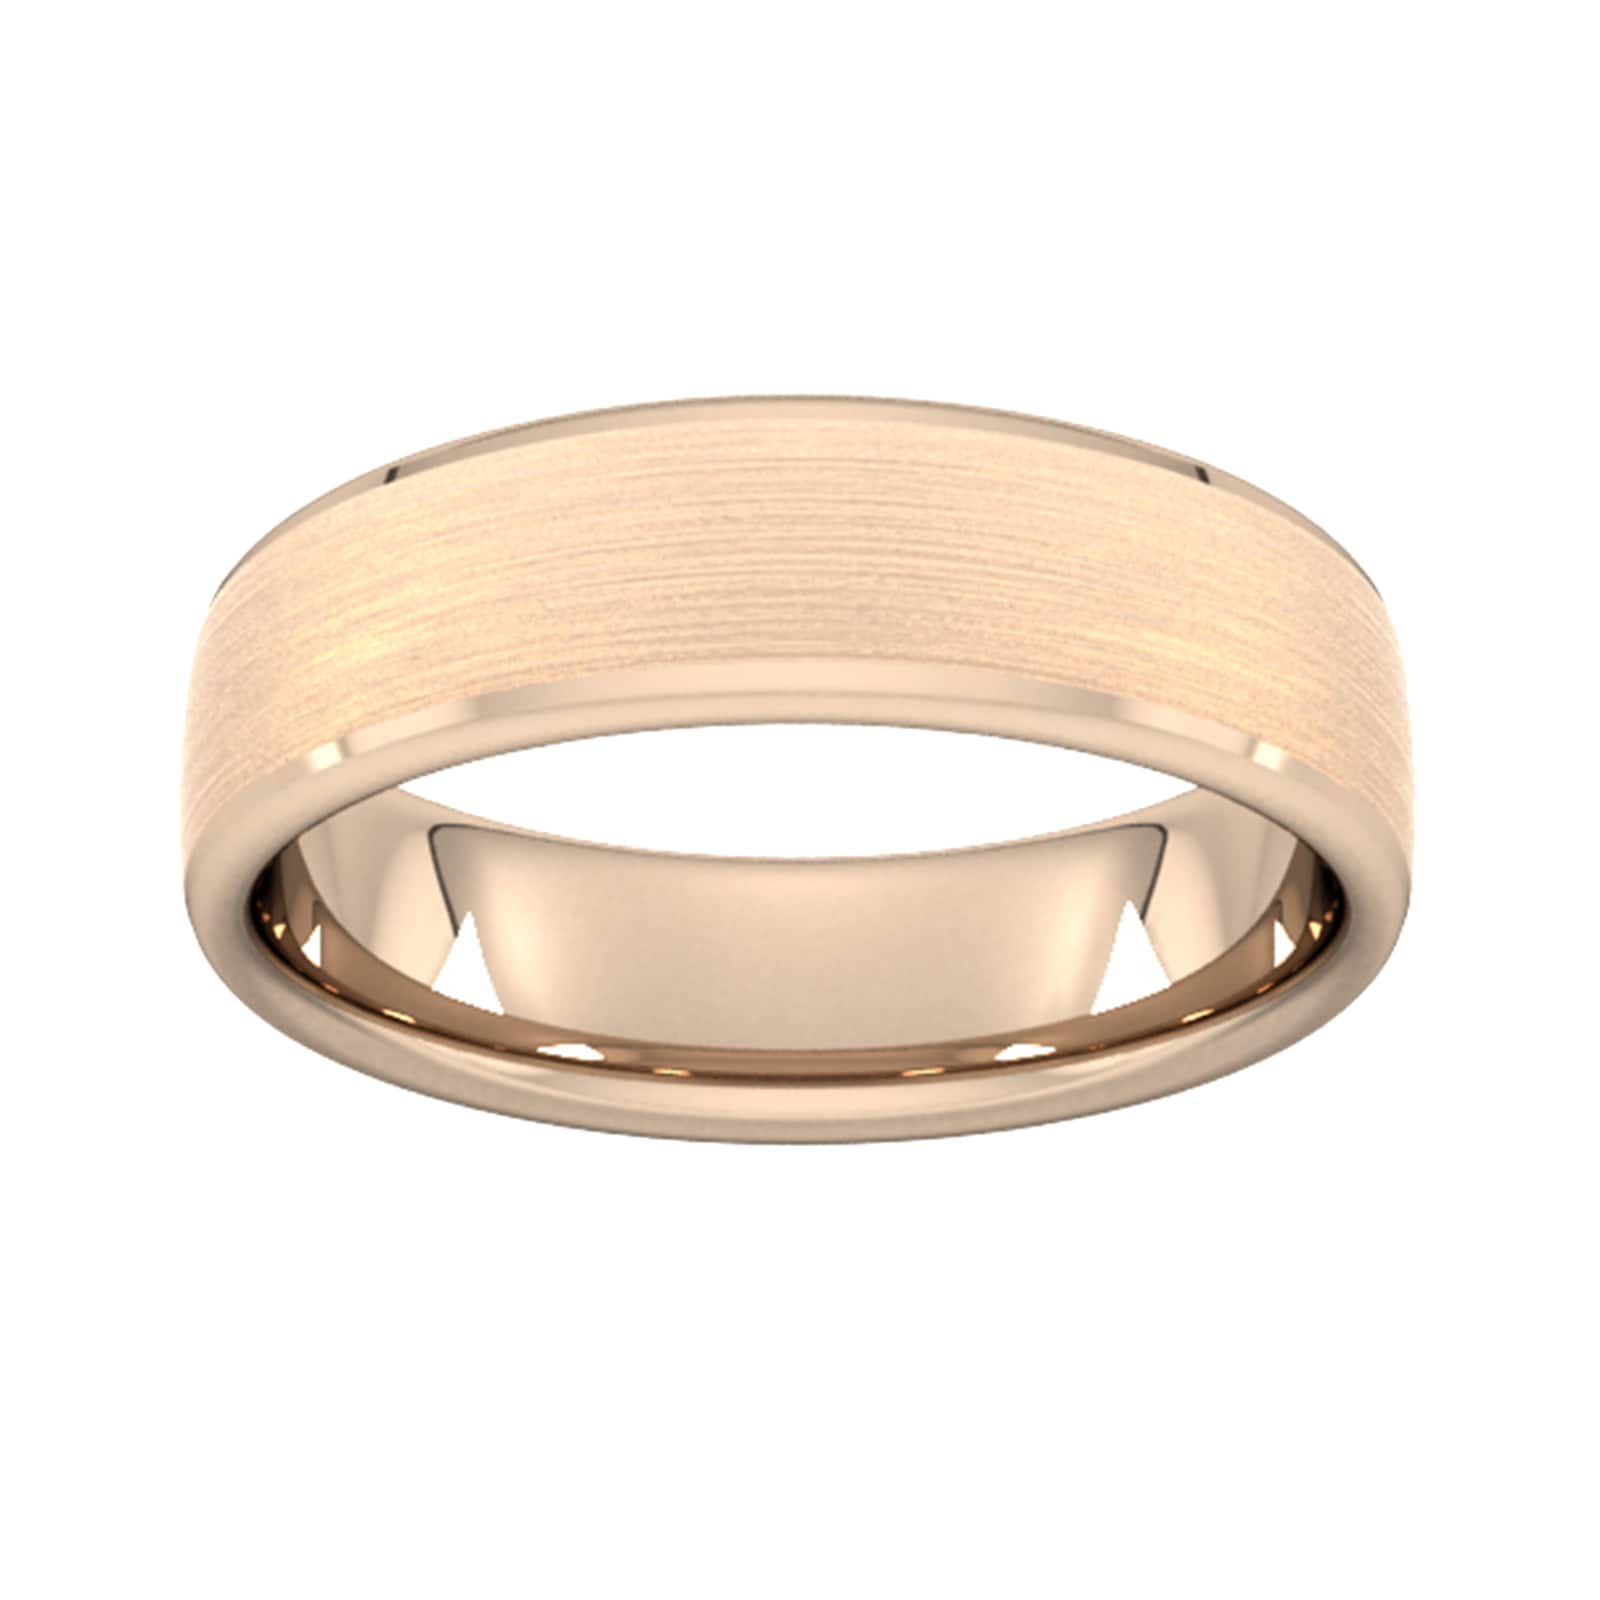 6mm Slight Court Standard Polished Chamfered Edges With Matt Centre Wedding Ring In 9 Carat Rose Gold - Ring Size L